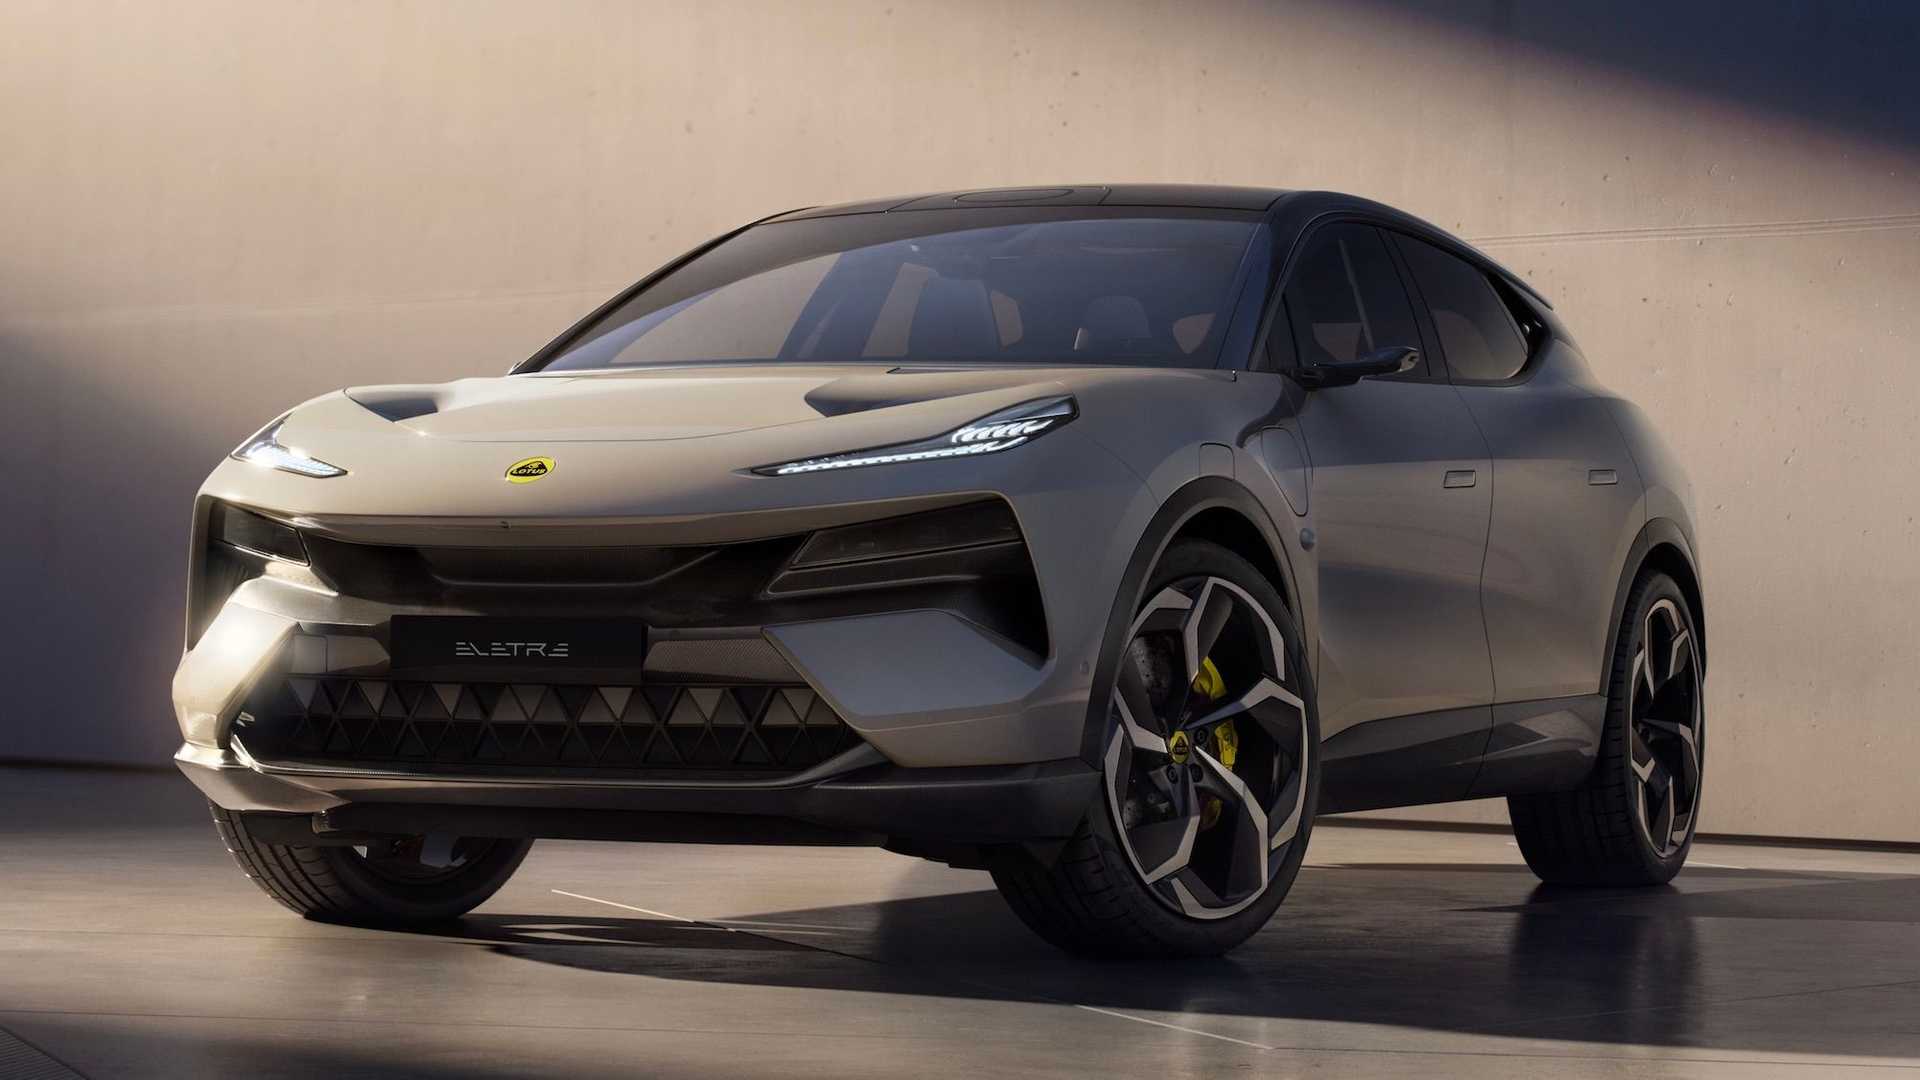 Lotus Eletre Super SUV Priced From $107,000 In The U.S.